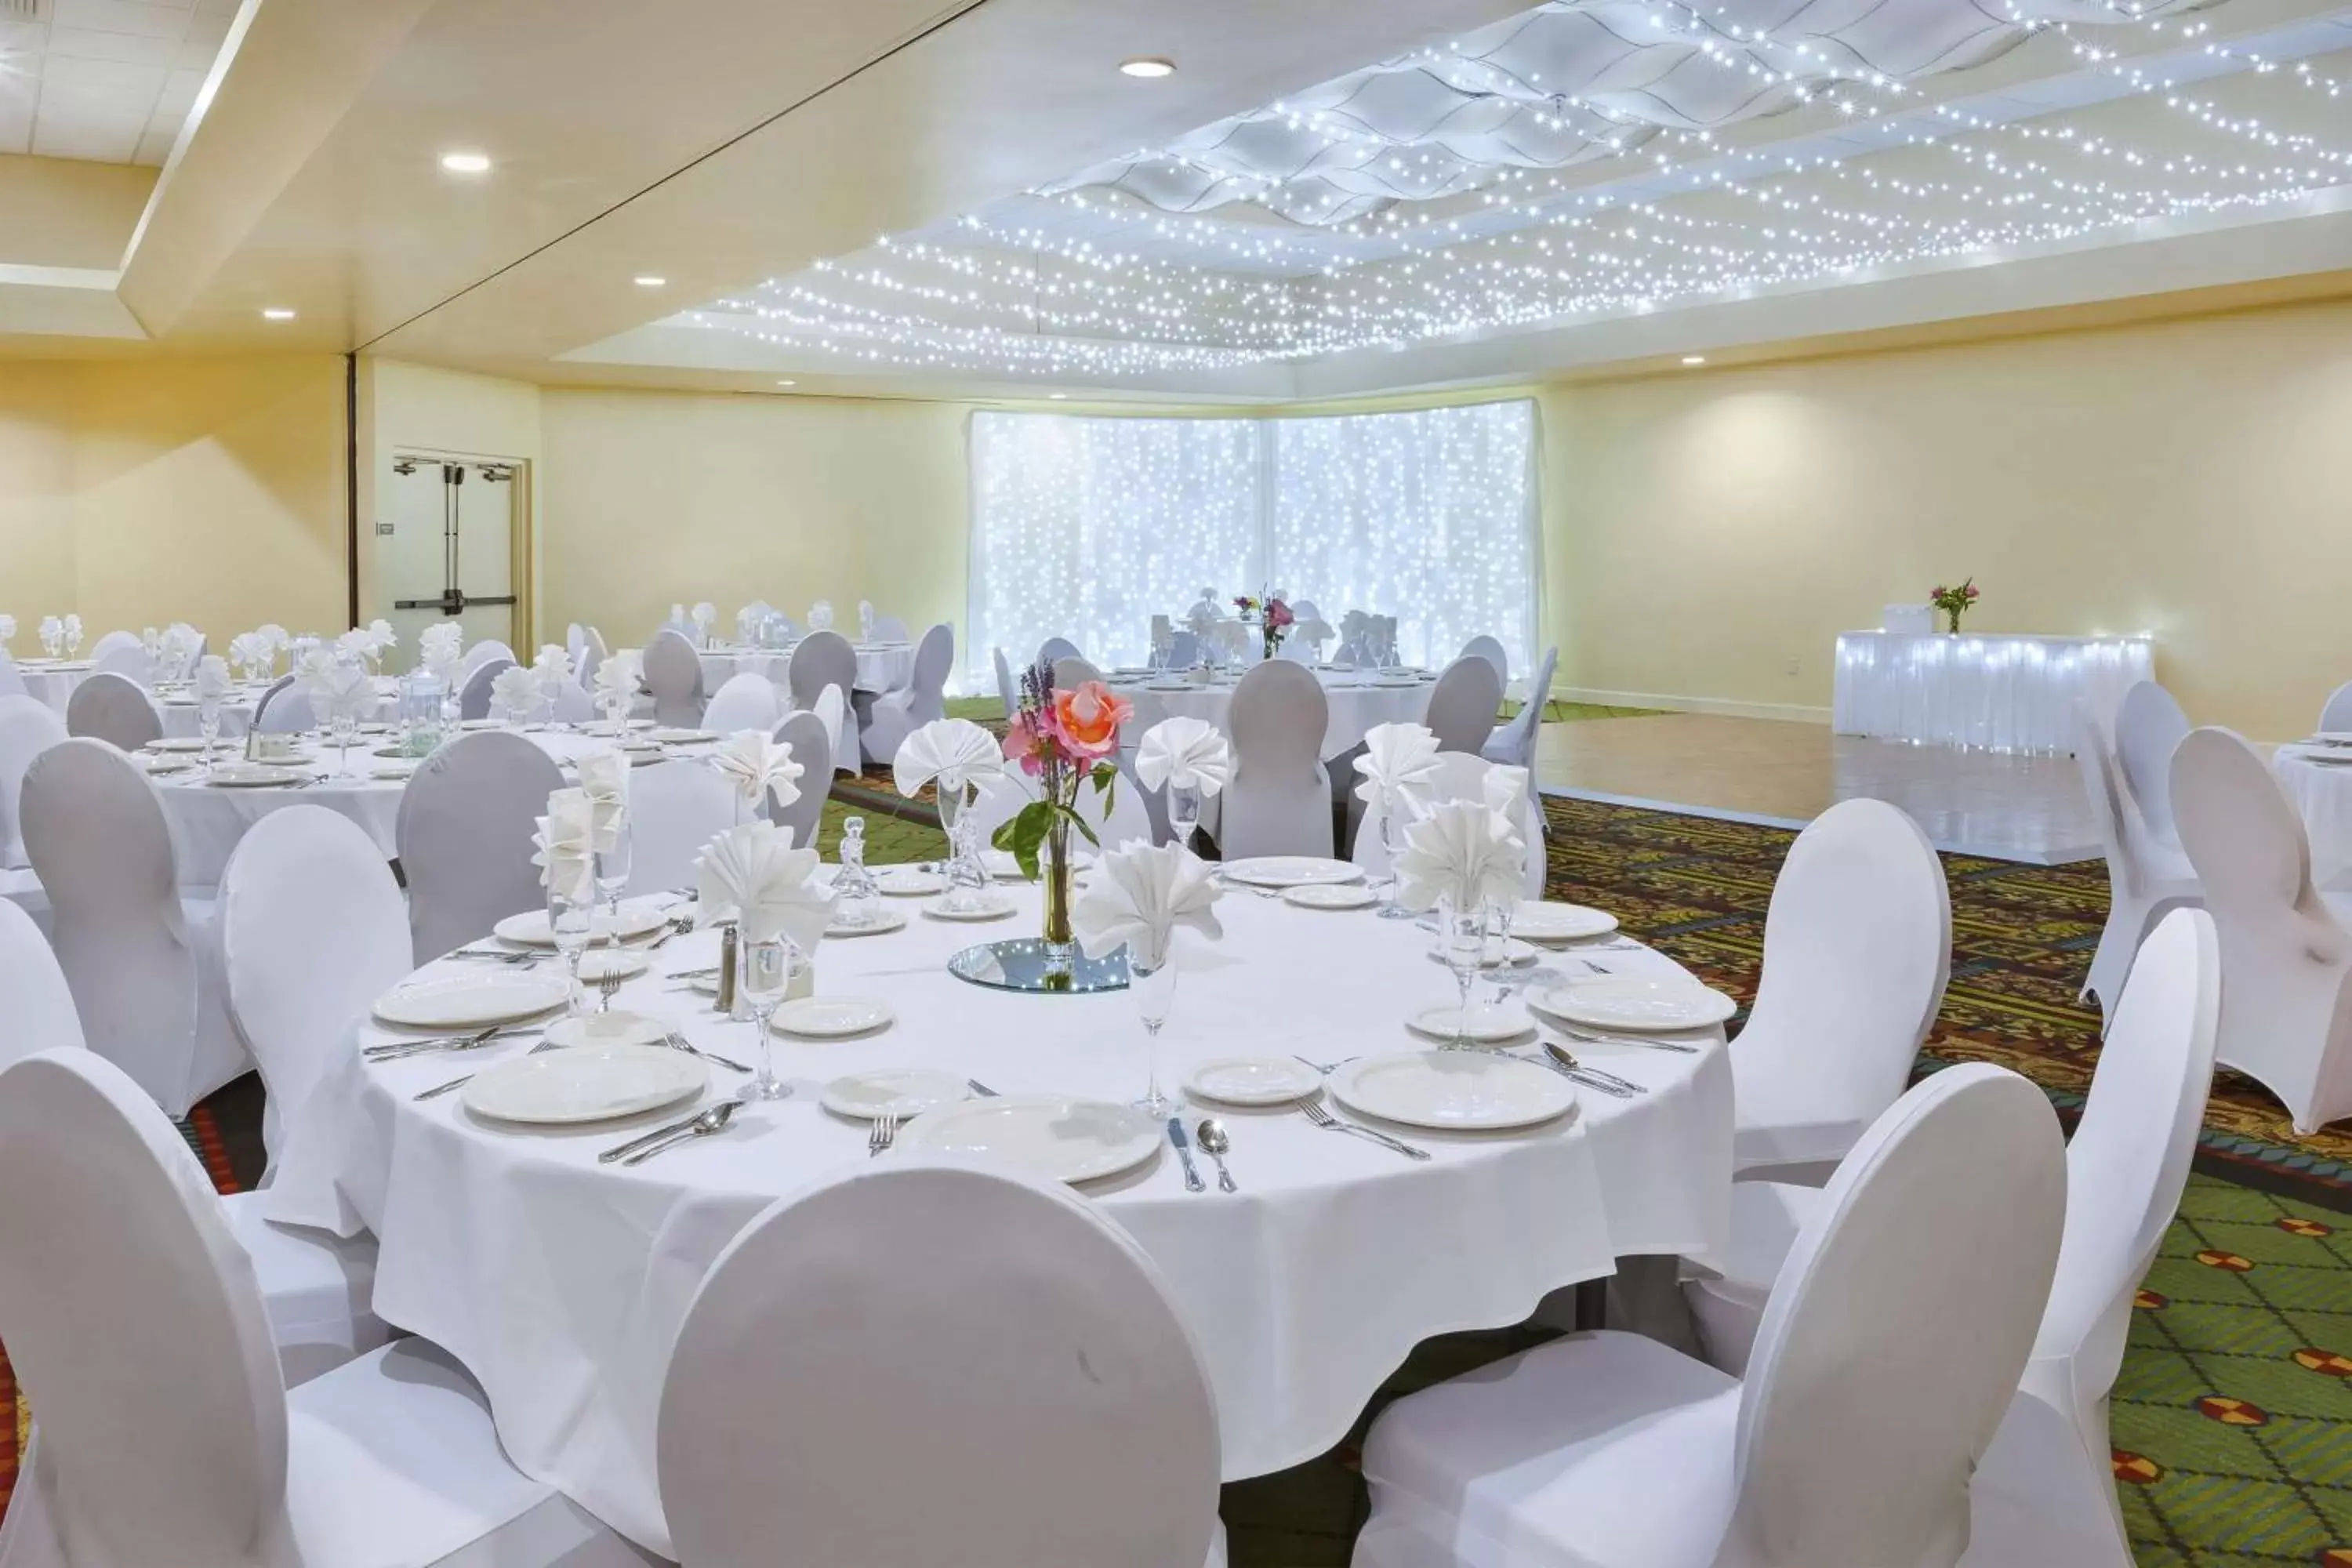 Meeting/conference room, Banquet Facilities in DoubleTree by Hilton Holland